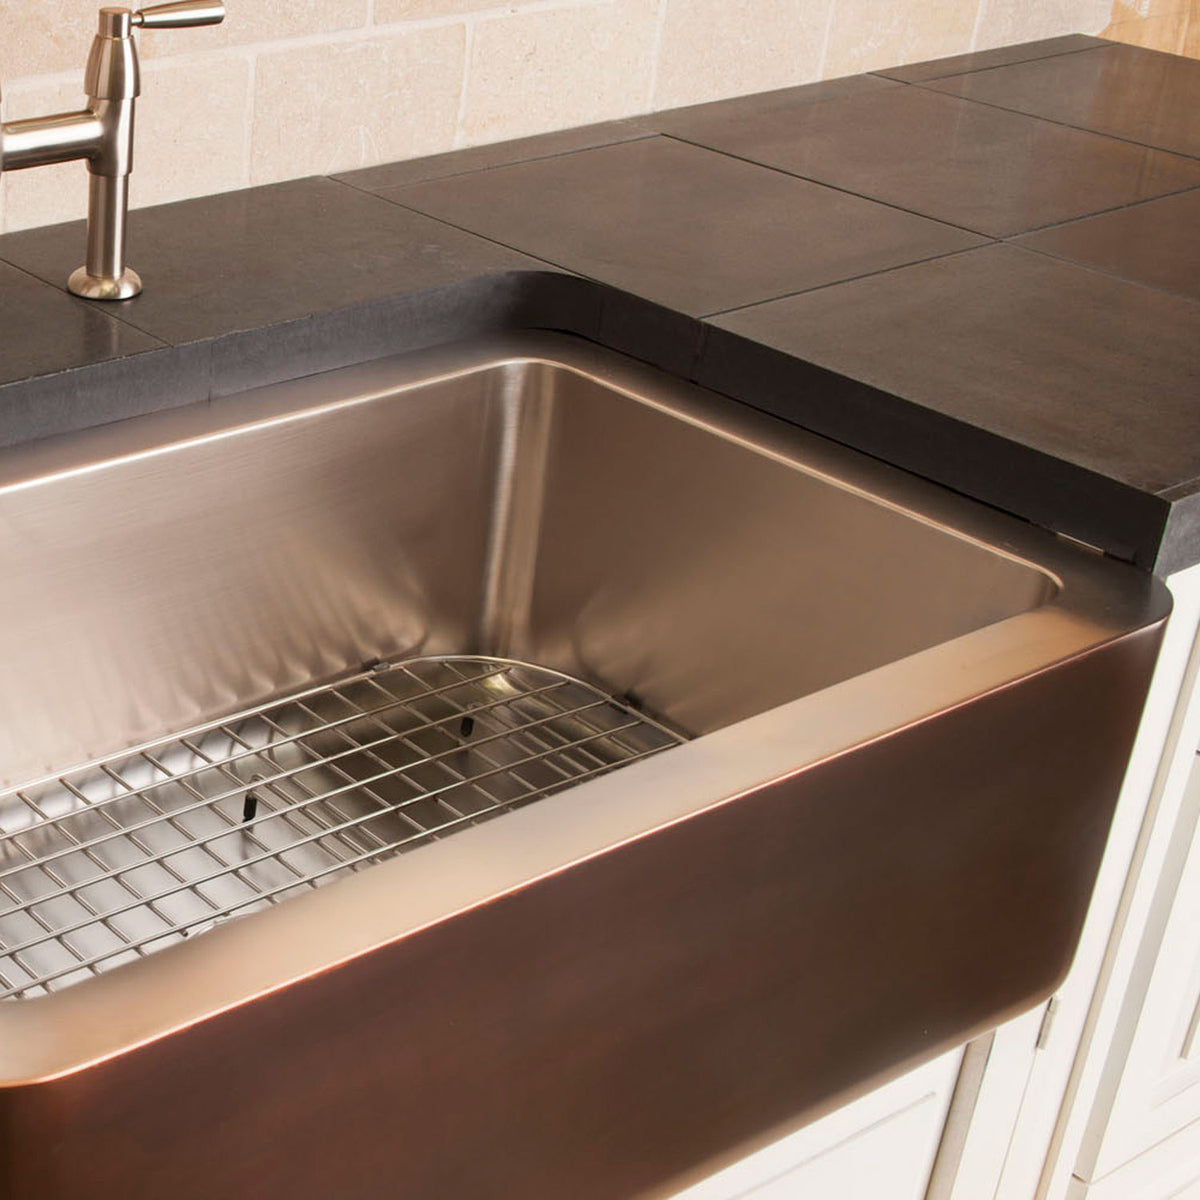 Farmhouse sink with stainless steel interior and copper exterior image 4 of 4